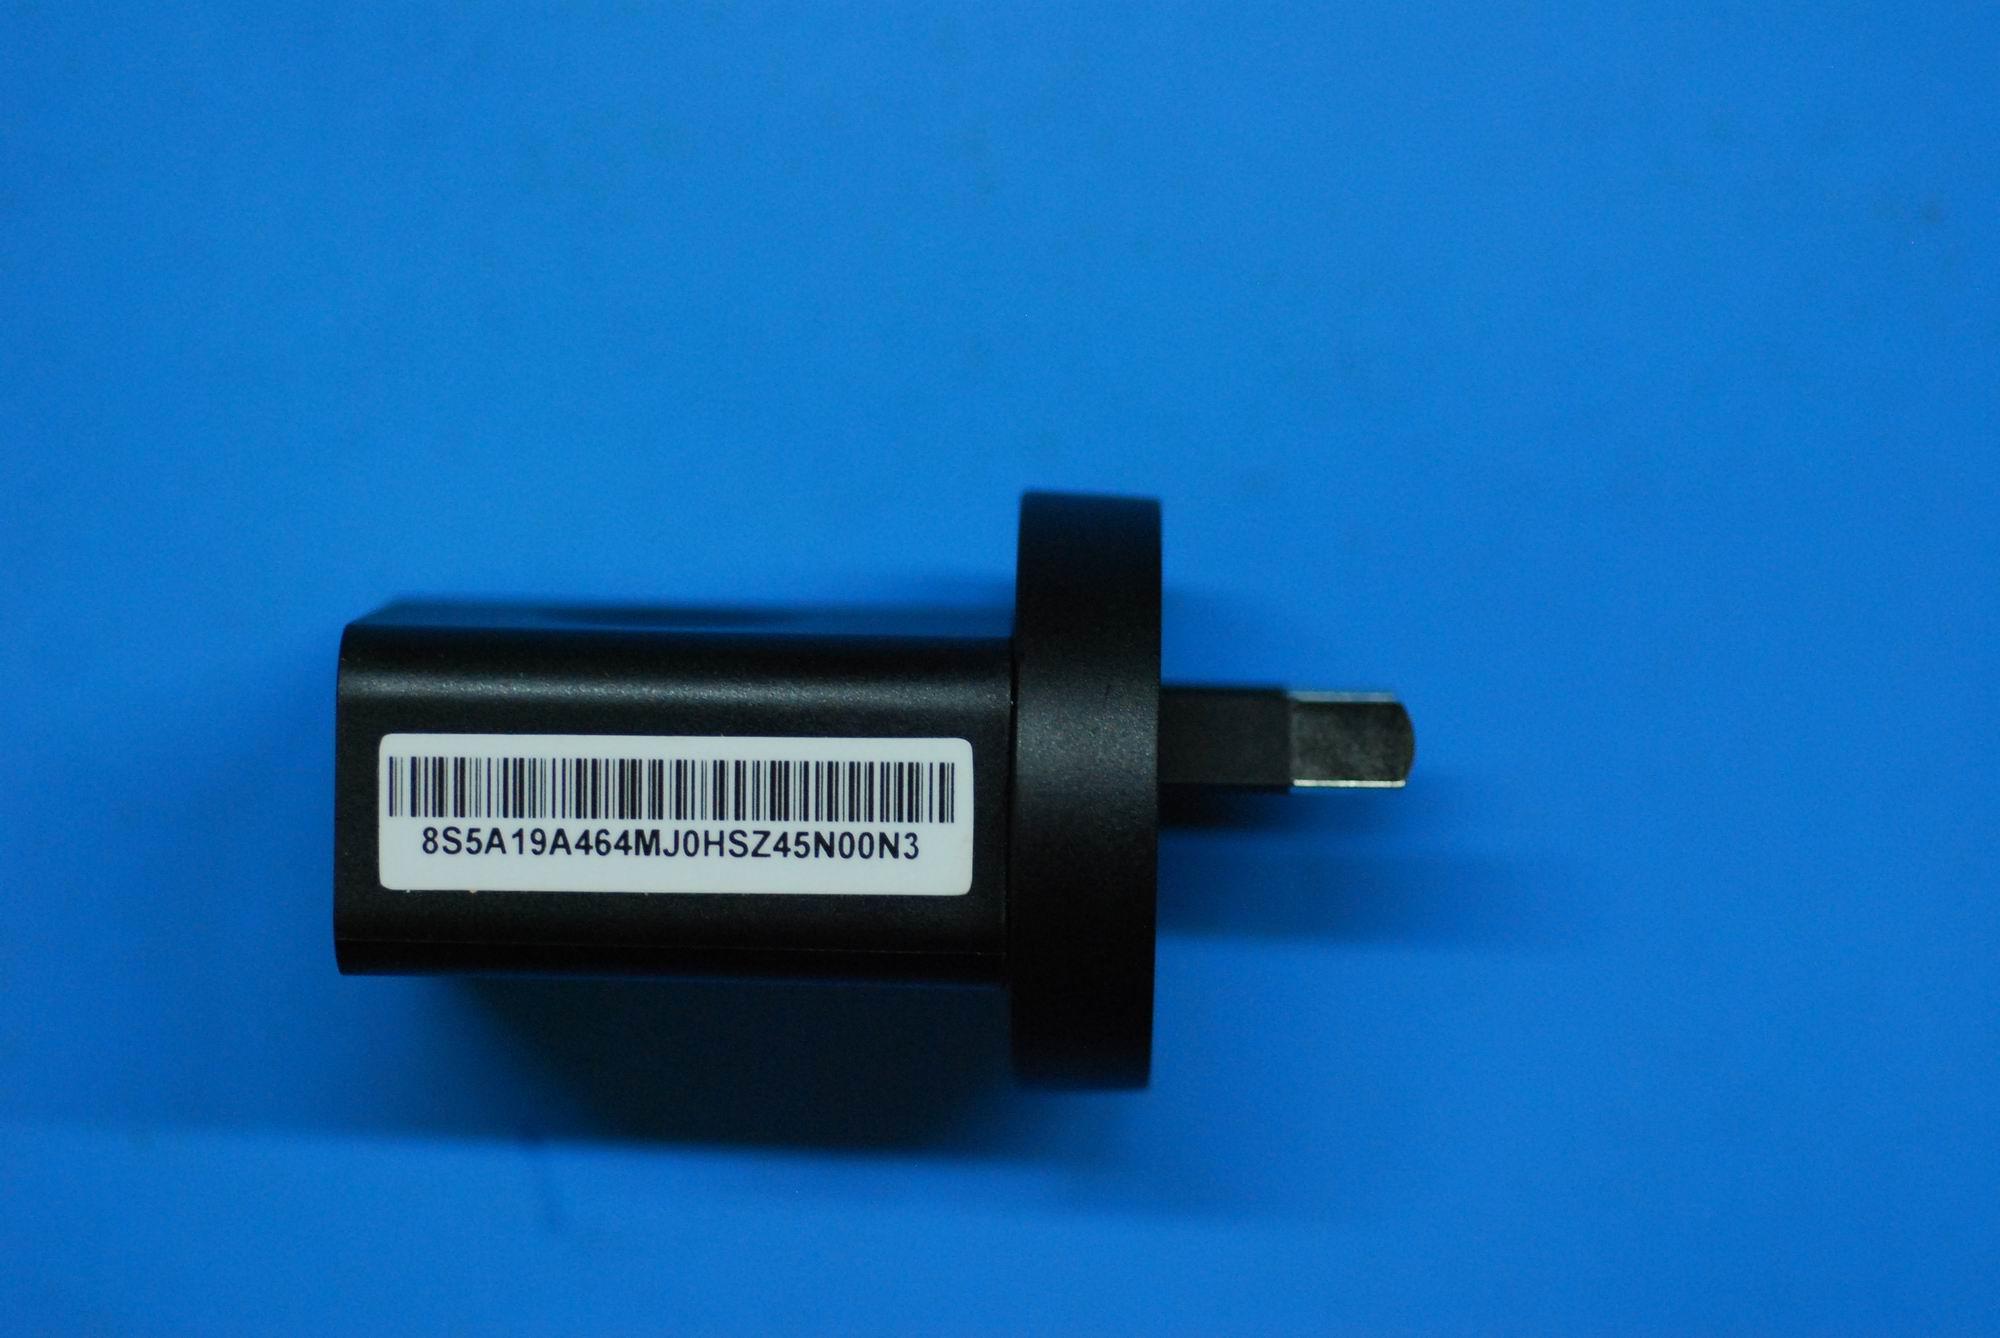 Lenovo TAB 2 A8-50 Charger/Adapter - 5A19A464MJ